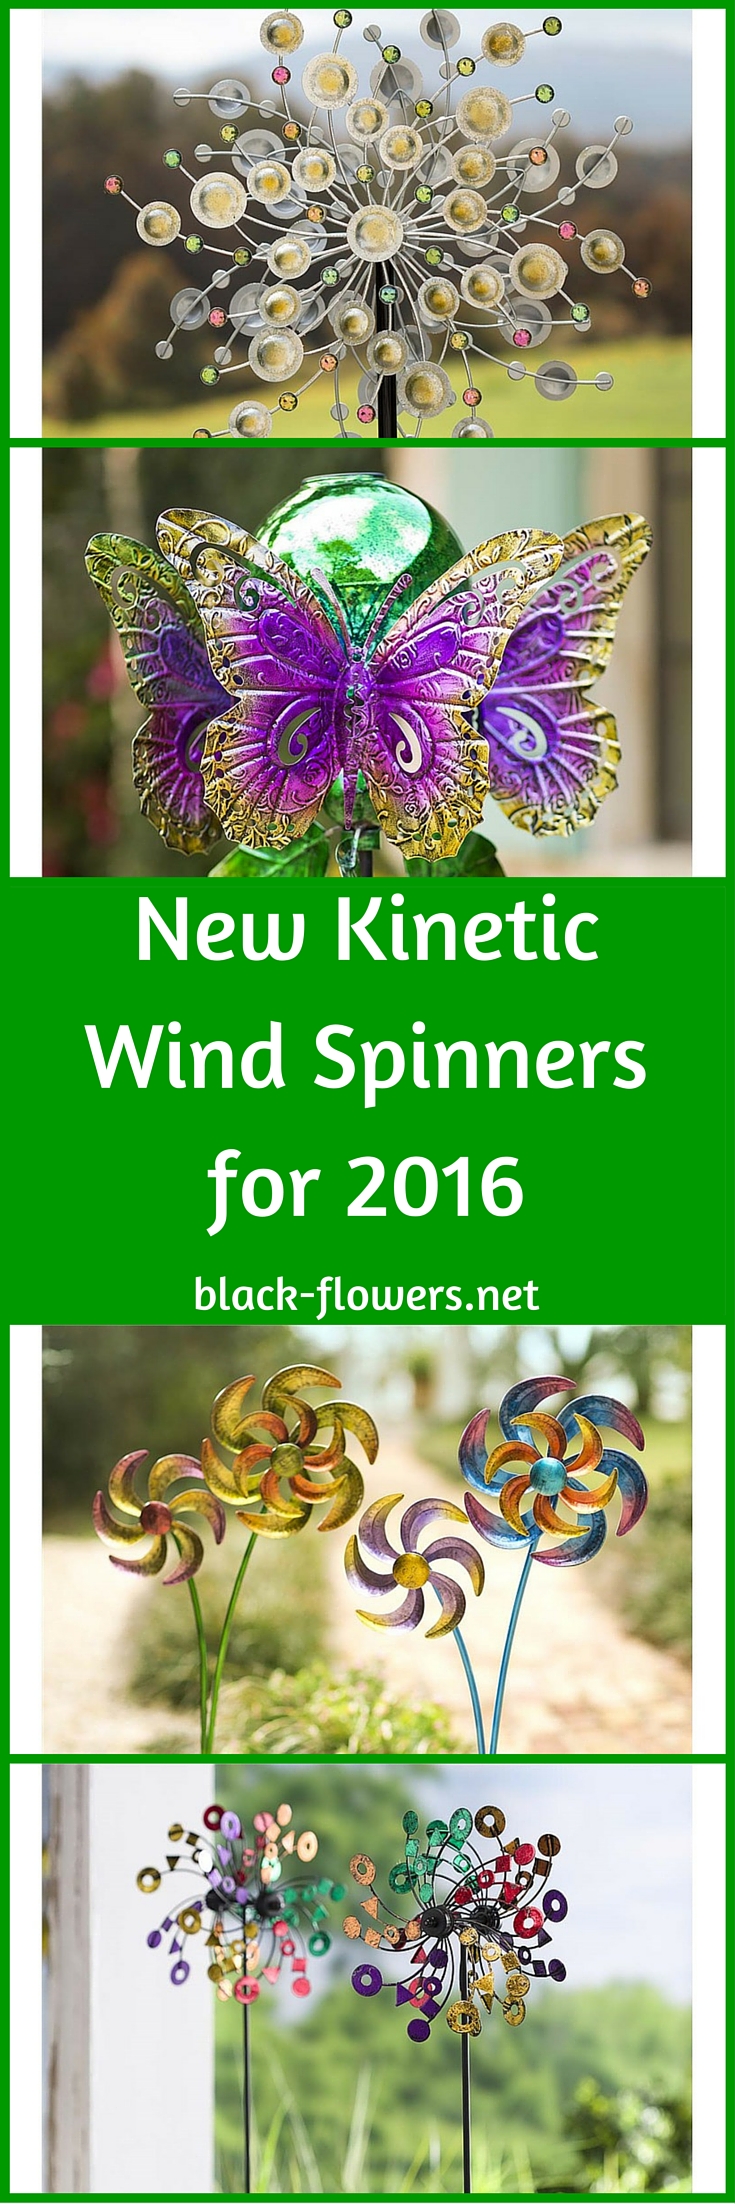 New Kinetic Wind Spinners for 2016